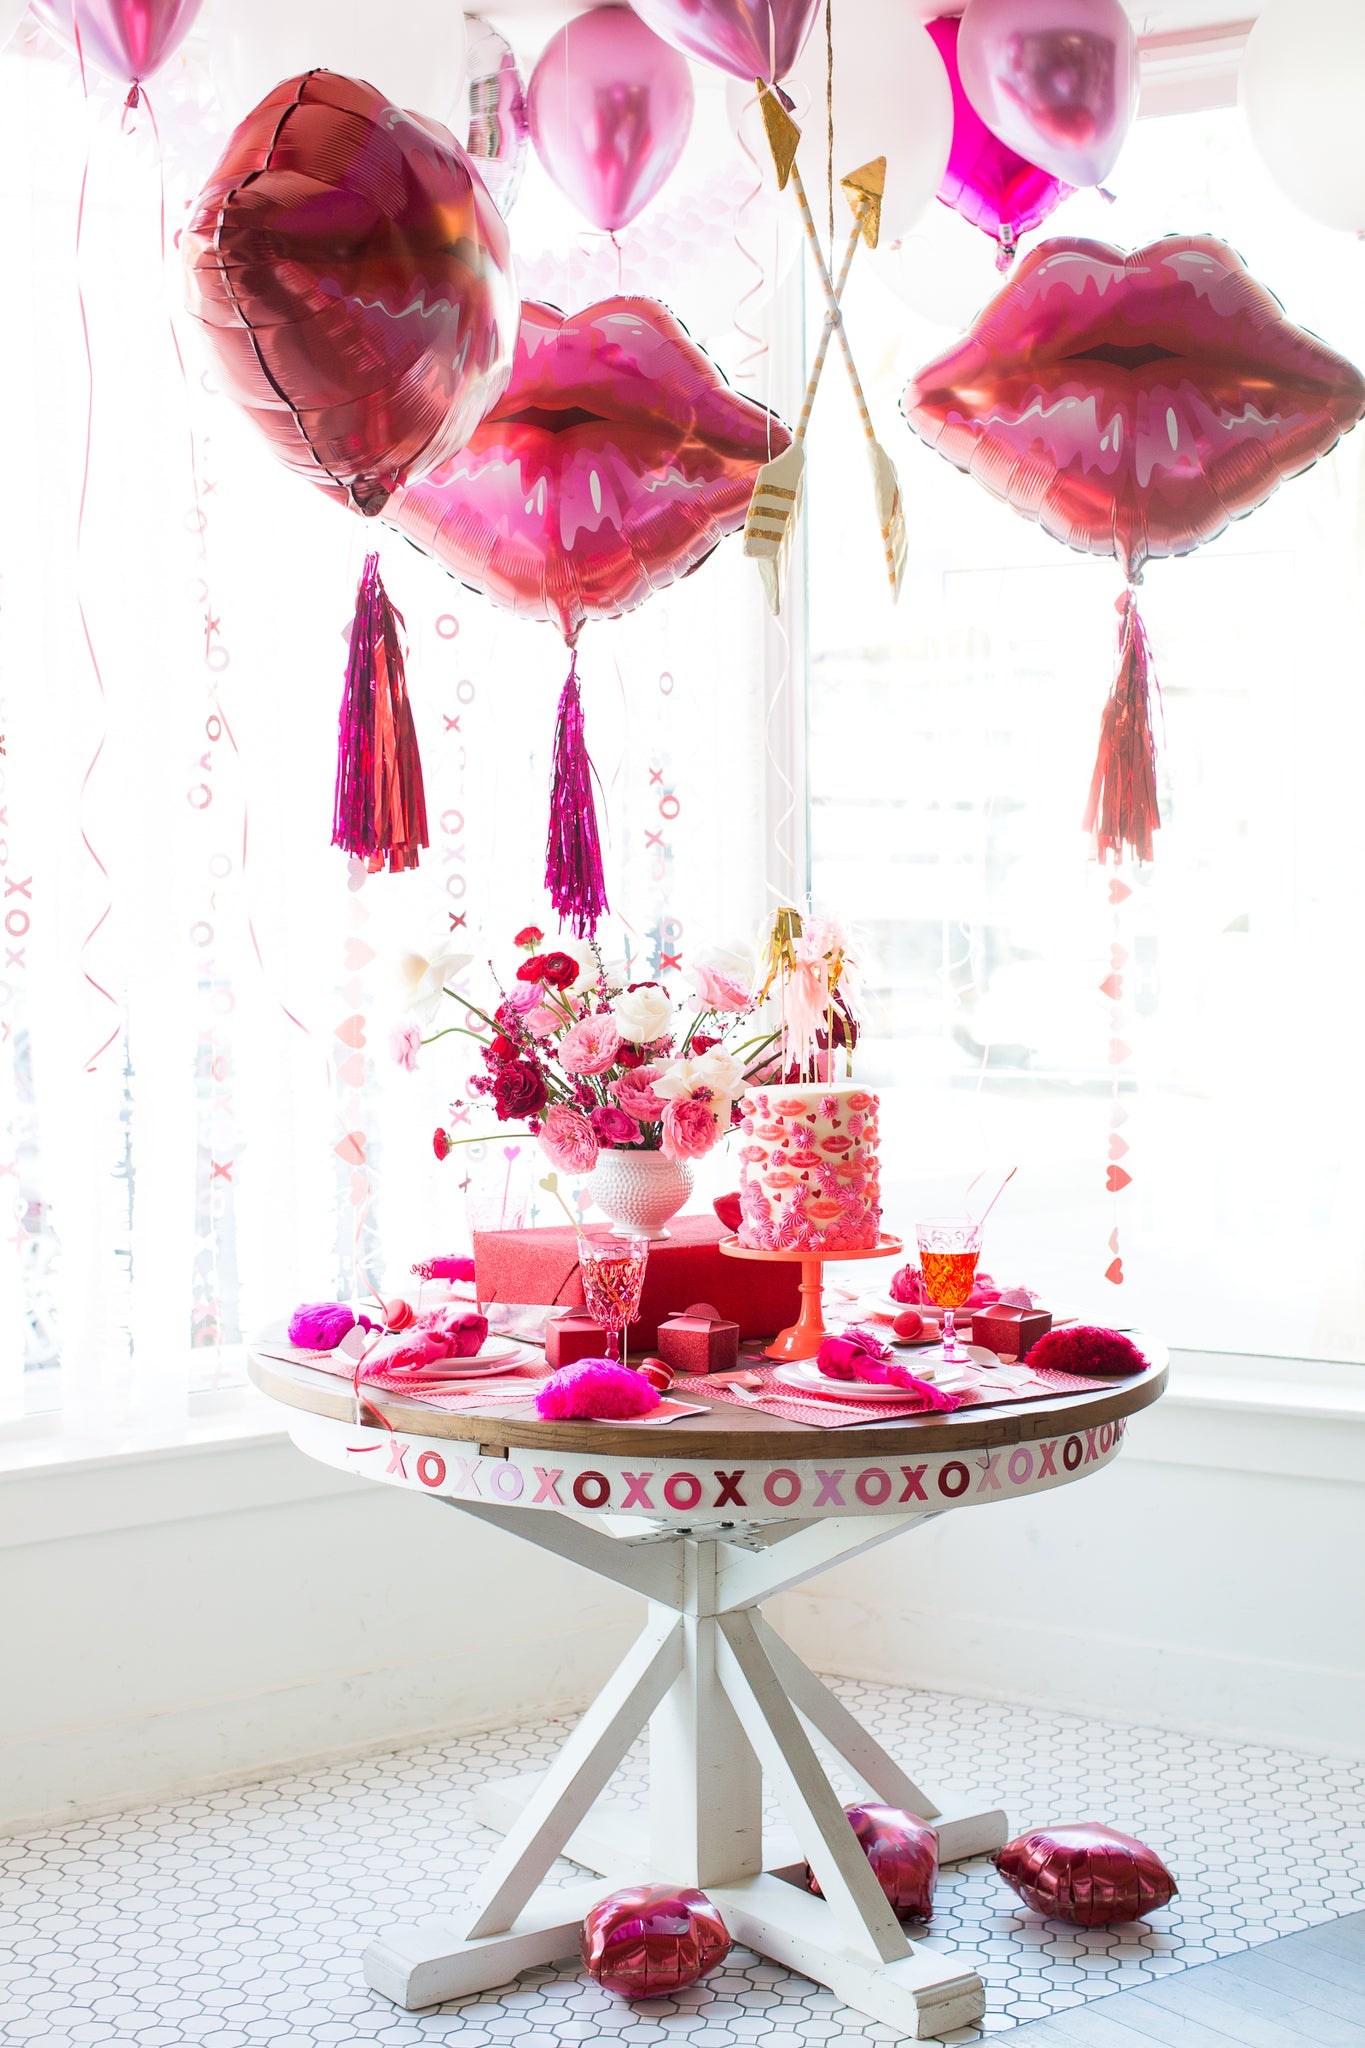 Kissing booth themed Valentine's Day decorations